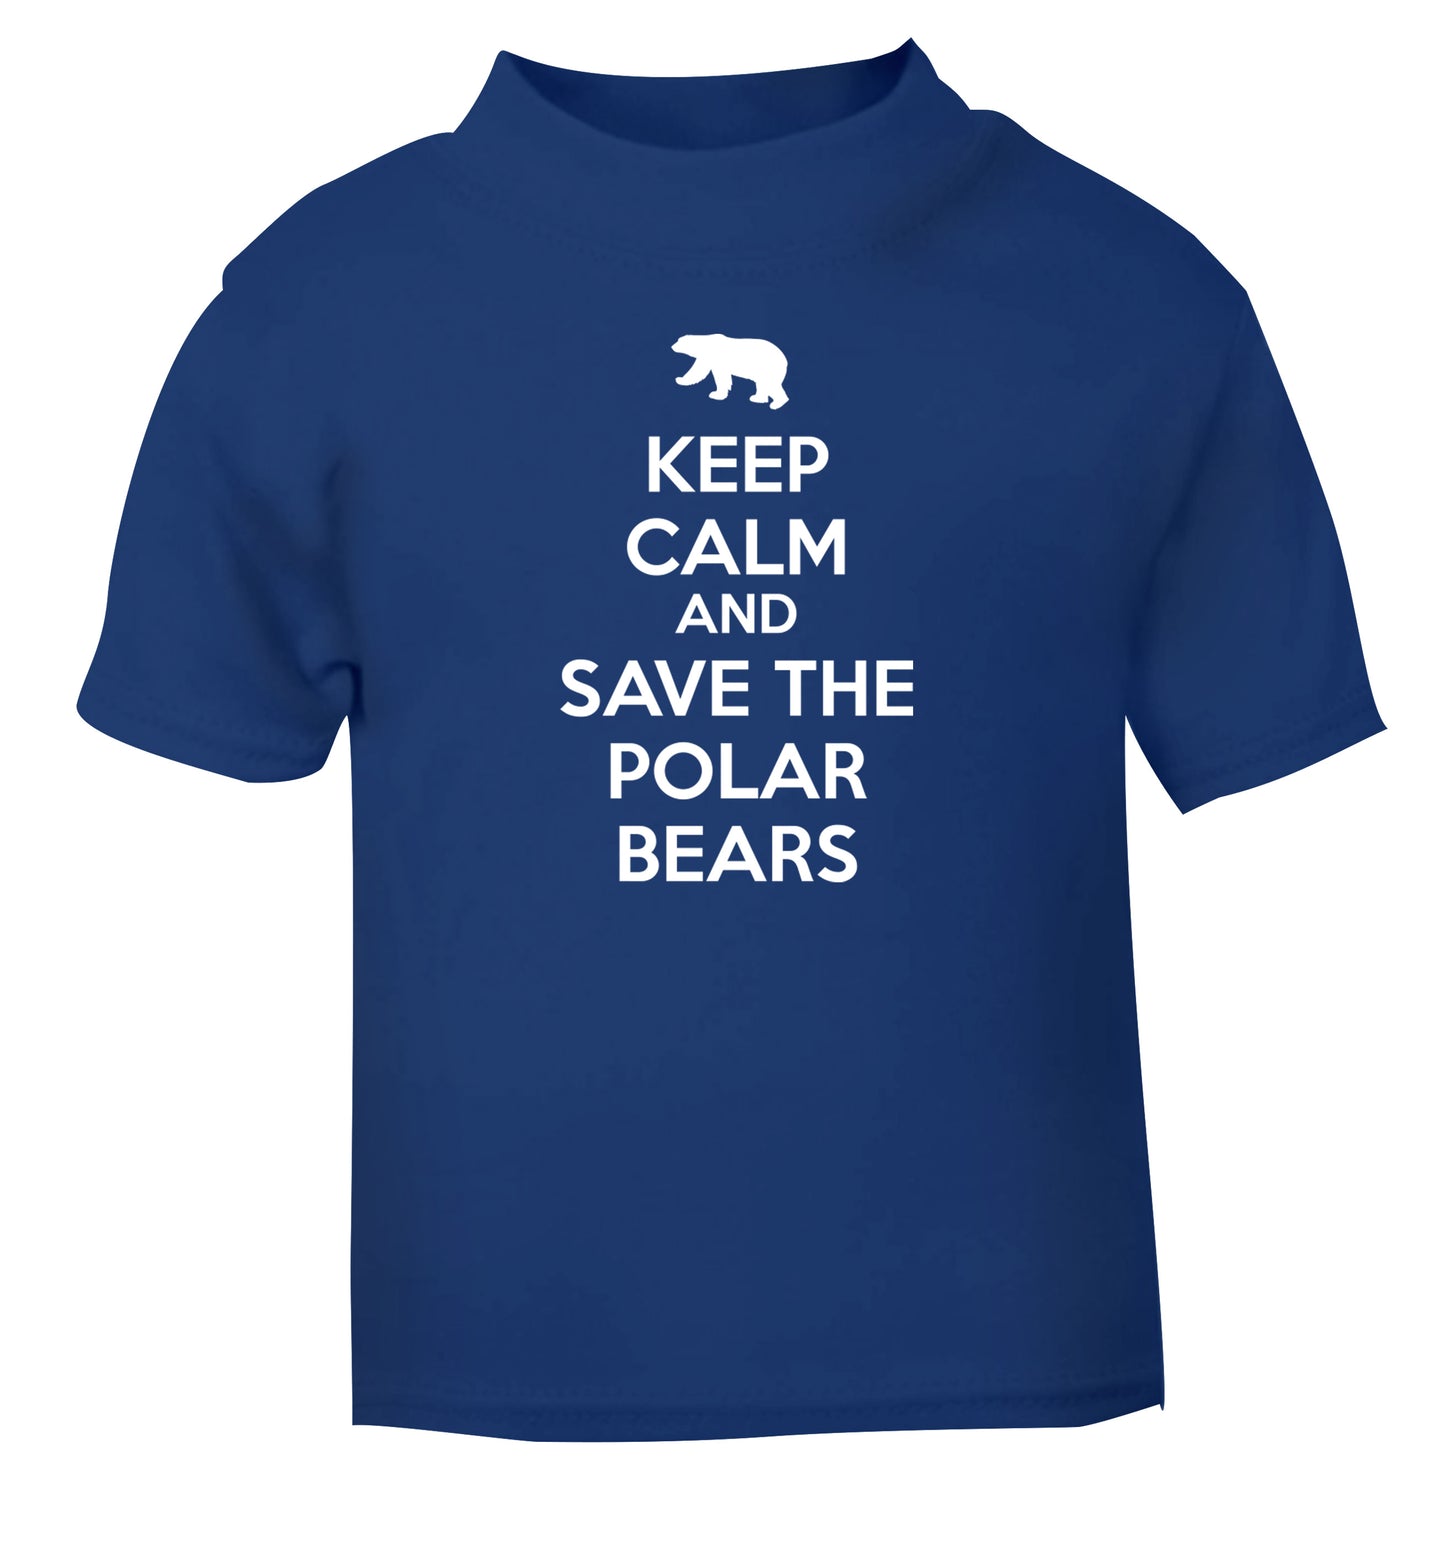 Keep calm and save the polar bears blue Baby Toddler Tshirt 2 Years